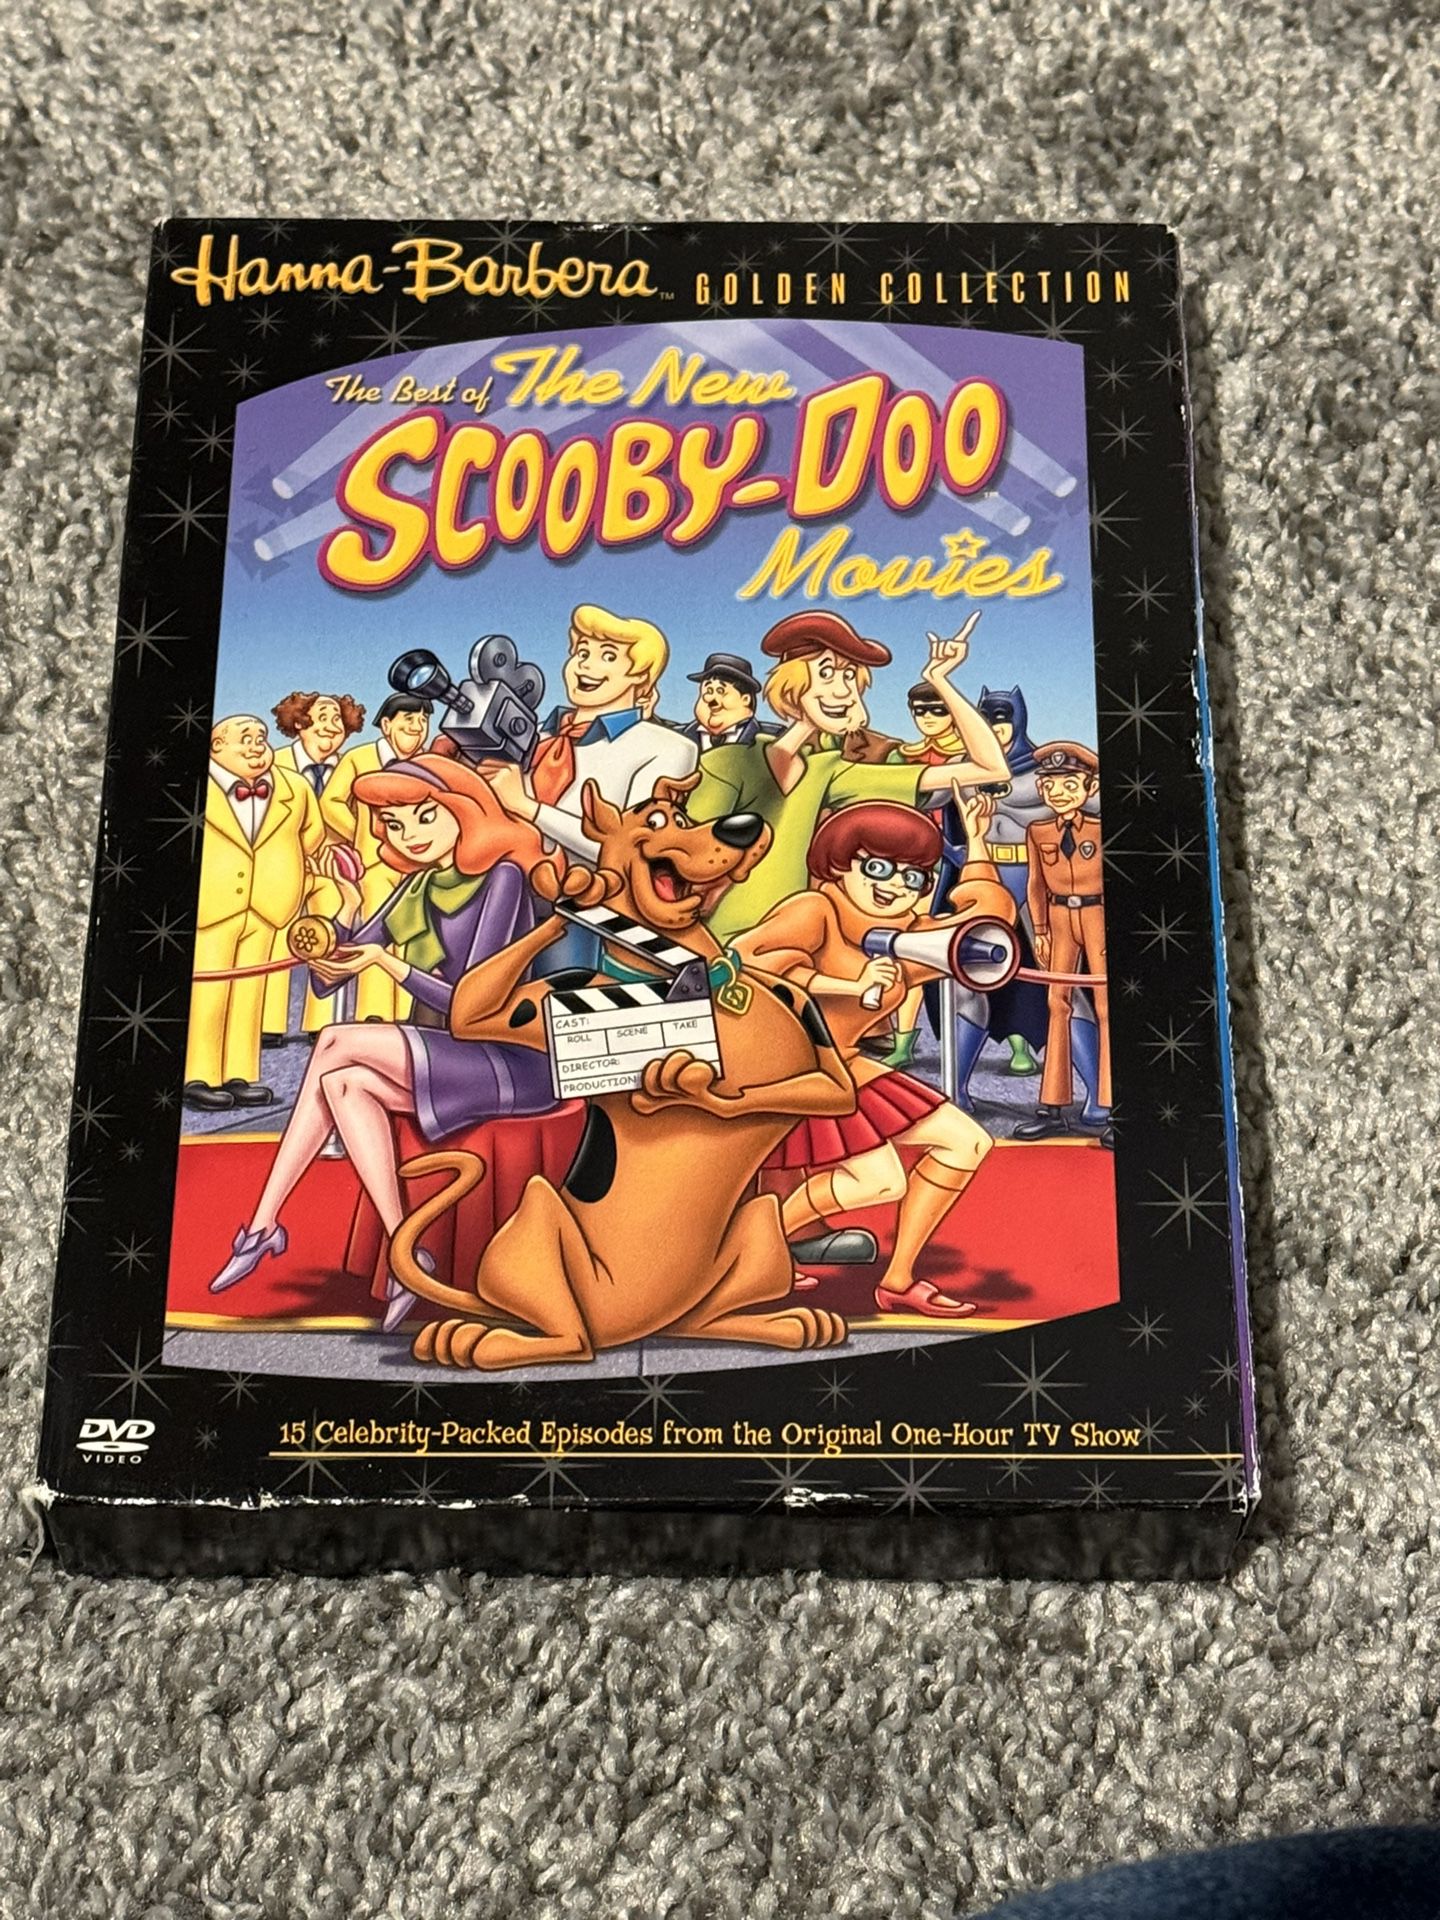 The Best Of The New Scooby Doo Movies